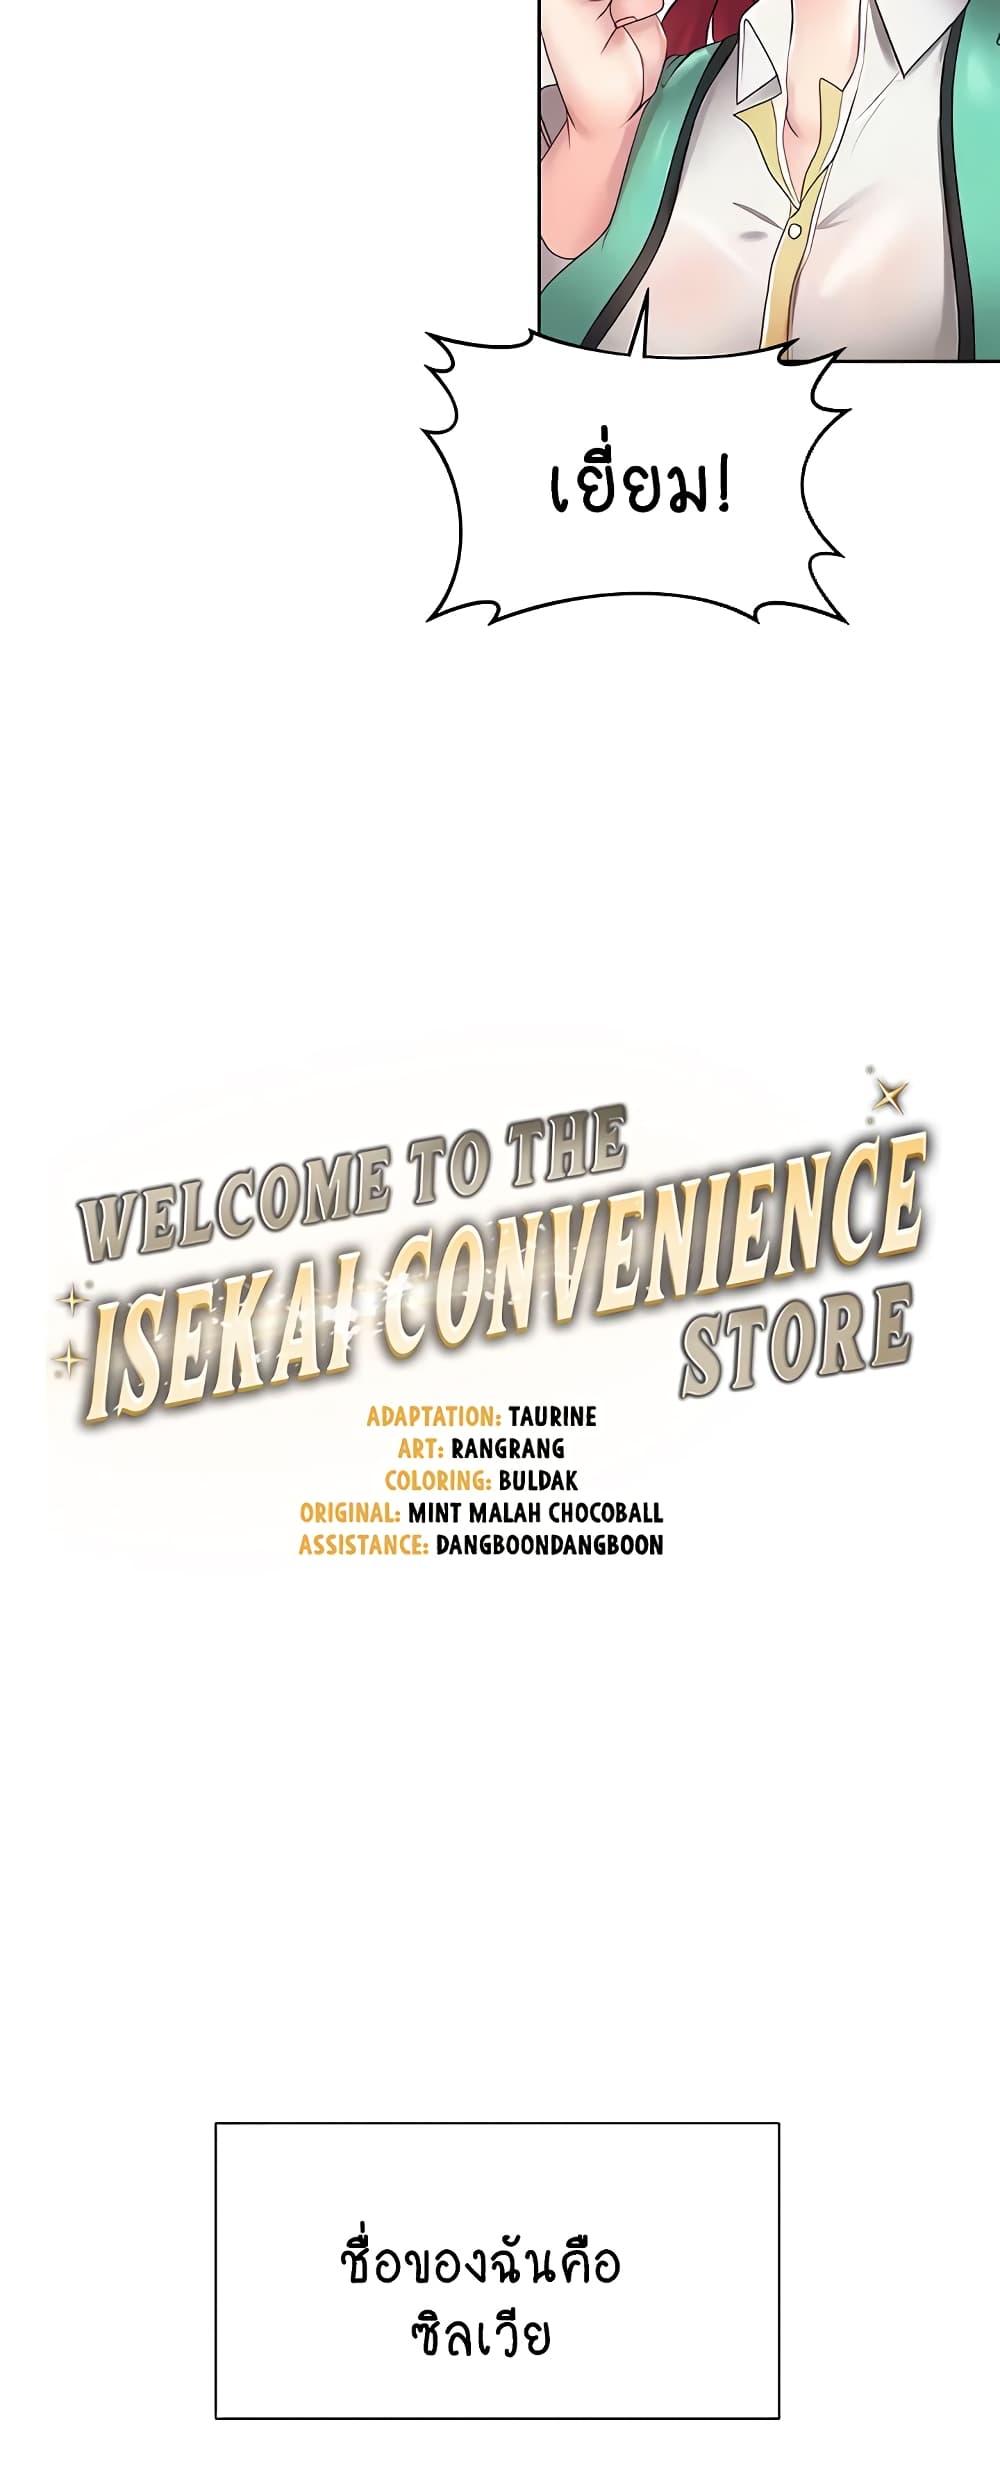 Welcome to the Isekai Convenience Store 11-11